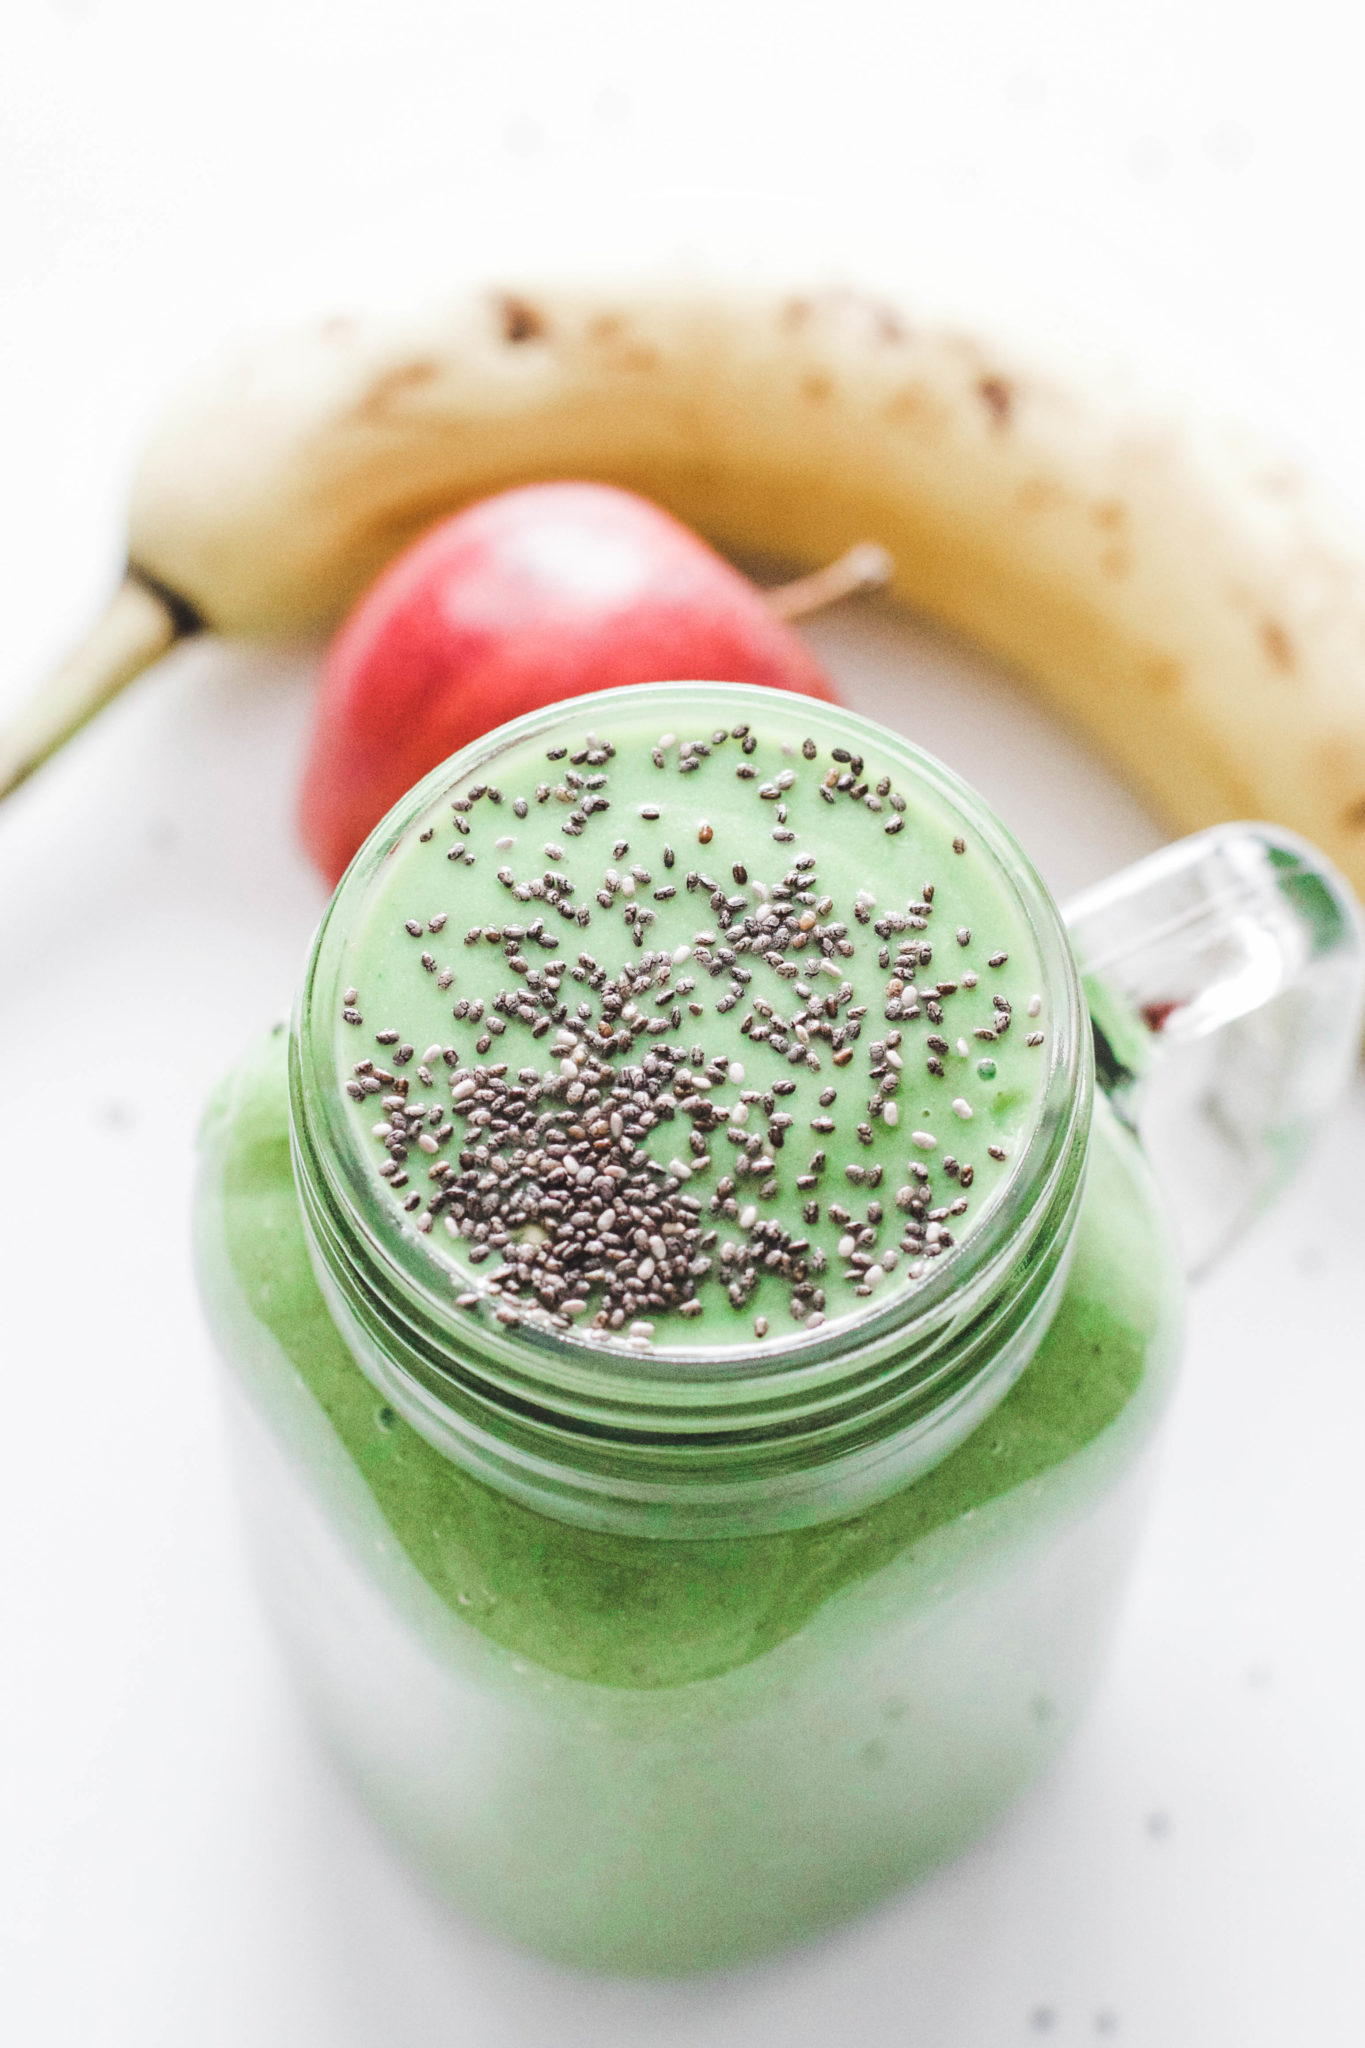 This everyday post-workout smoothie is quick and easy to make on the regular and necessary to better digestion, boost the metabolism, recover after exercise, and aid in weight loss. Green smoothie | Vegan | Whole 30 | Breakfast | Lunch | Meal Replacement | Low carb | Low calorie | Quick and Easy | Fibre | Protein | Fitness | Exercise | Get in Shape | Get Fit | Loose Weight | Detox | Cleanse | Healthy | Nutrition | Good for you | Post Workout | Morning smoothie | Paleo | Super Food | Recovery |